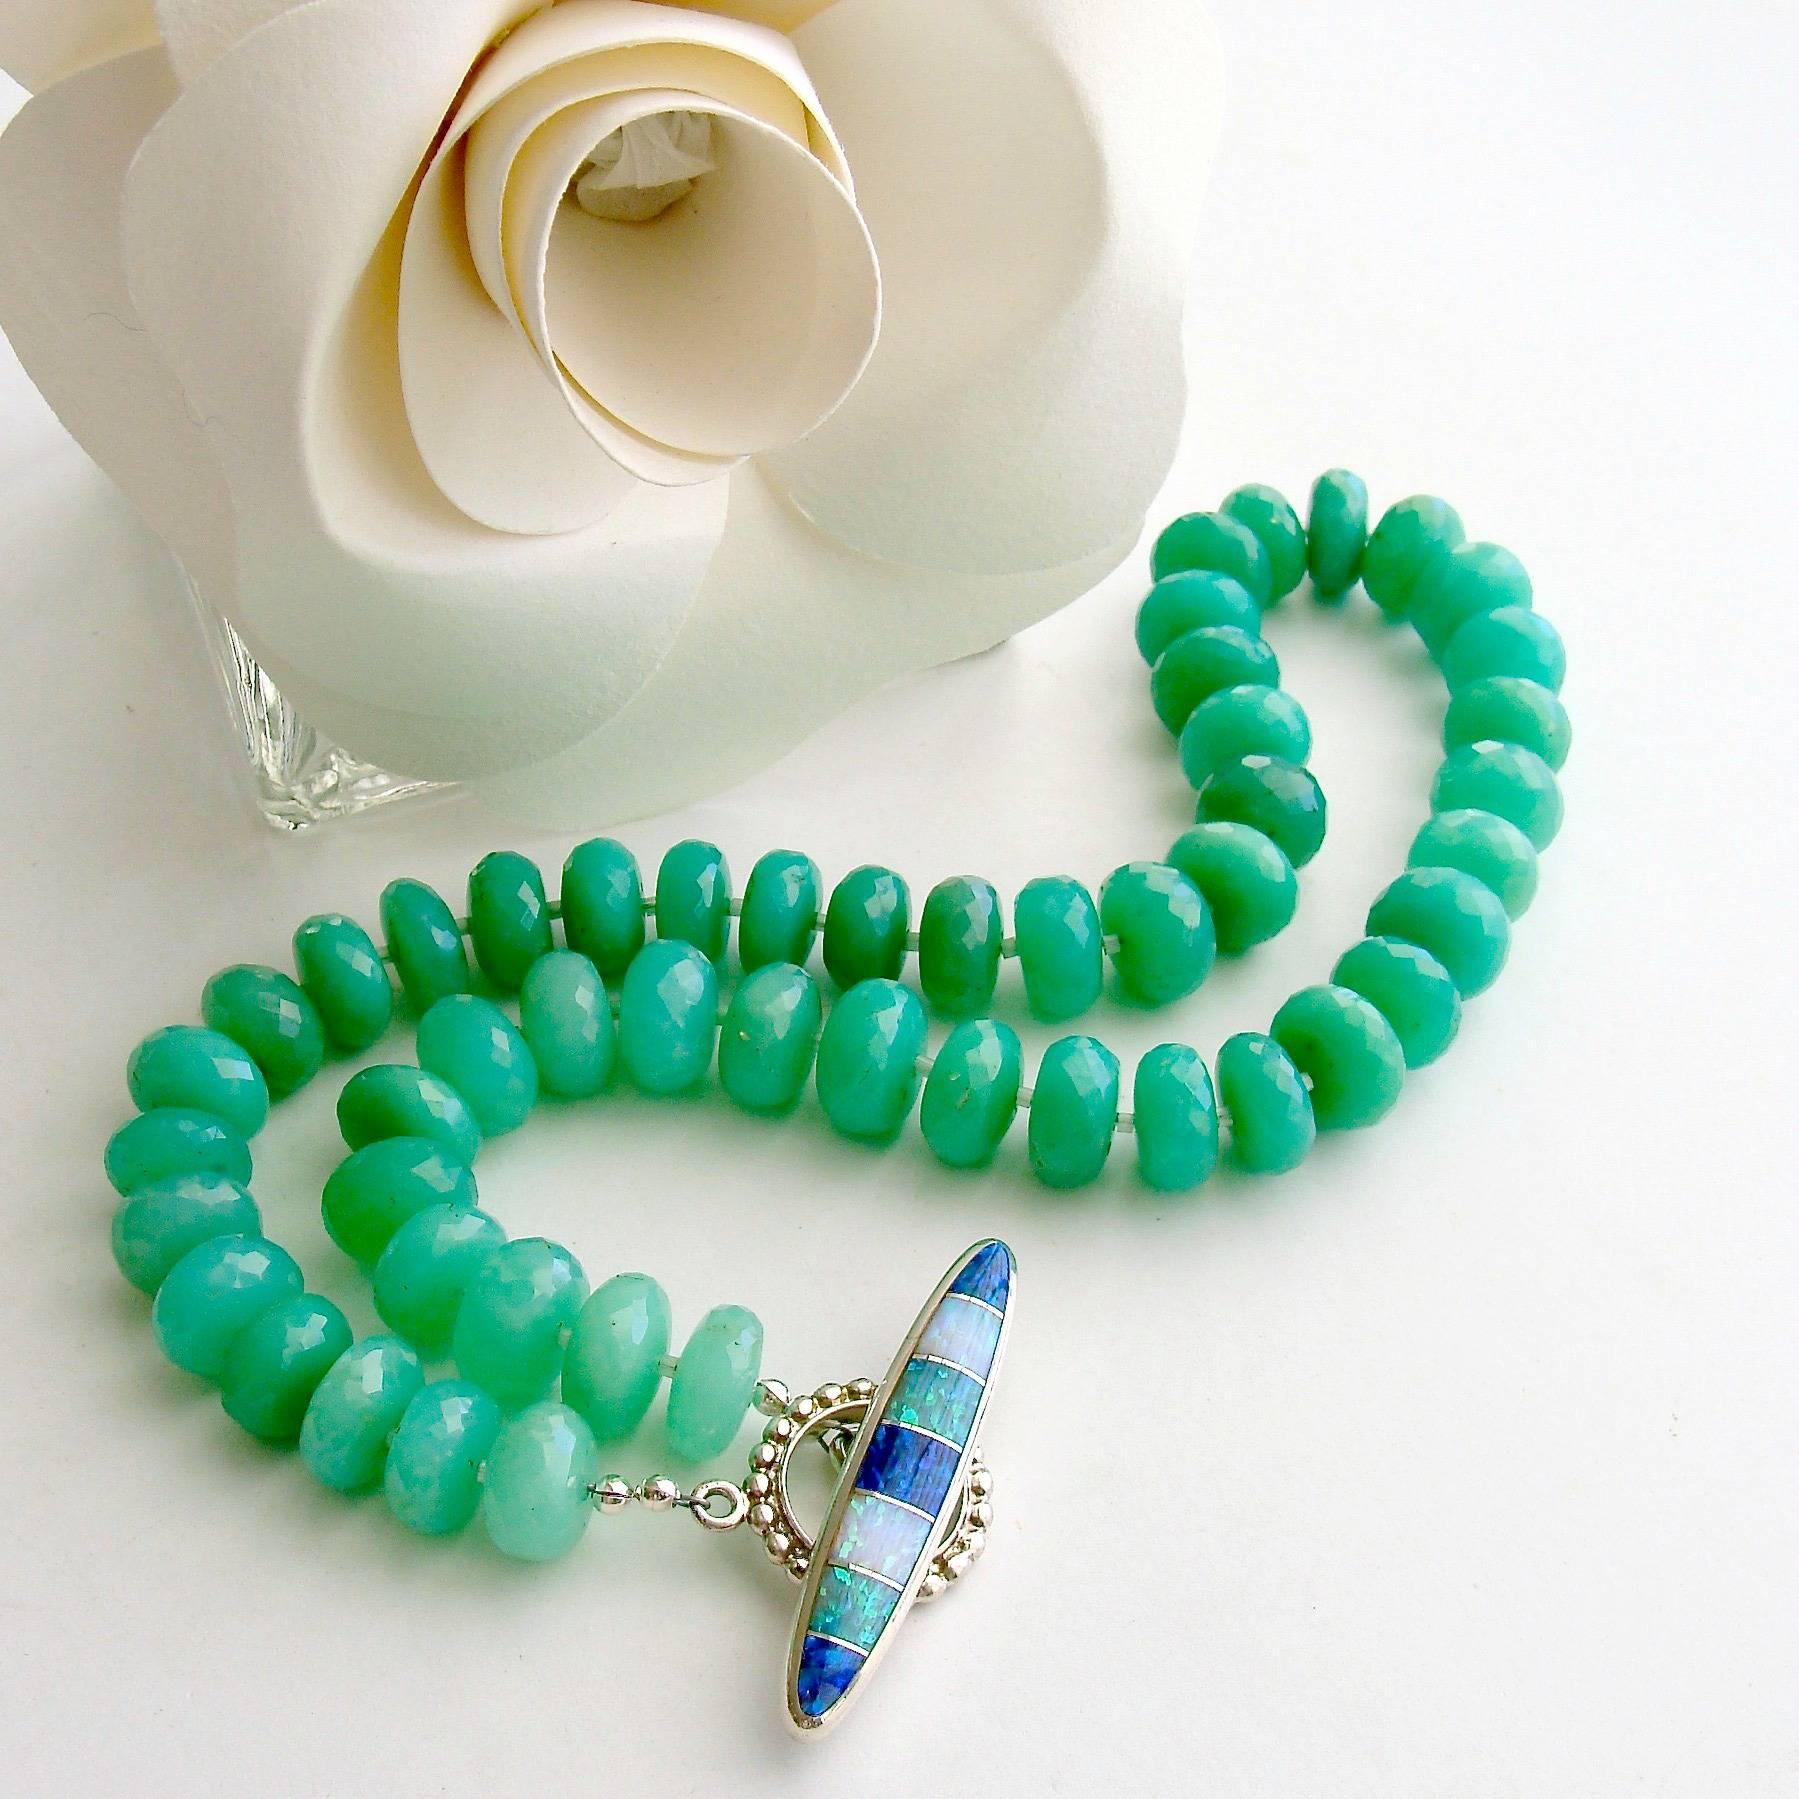 Courtney II Necklace.

Chrysoprase in recent years, has recently become the darling of the gem world and is one of the most searched stones on my website. I believe it is the fresh spearmint green color and ease of pairing with other stones that